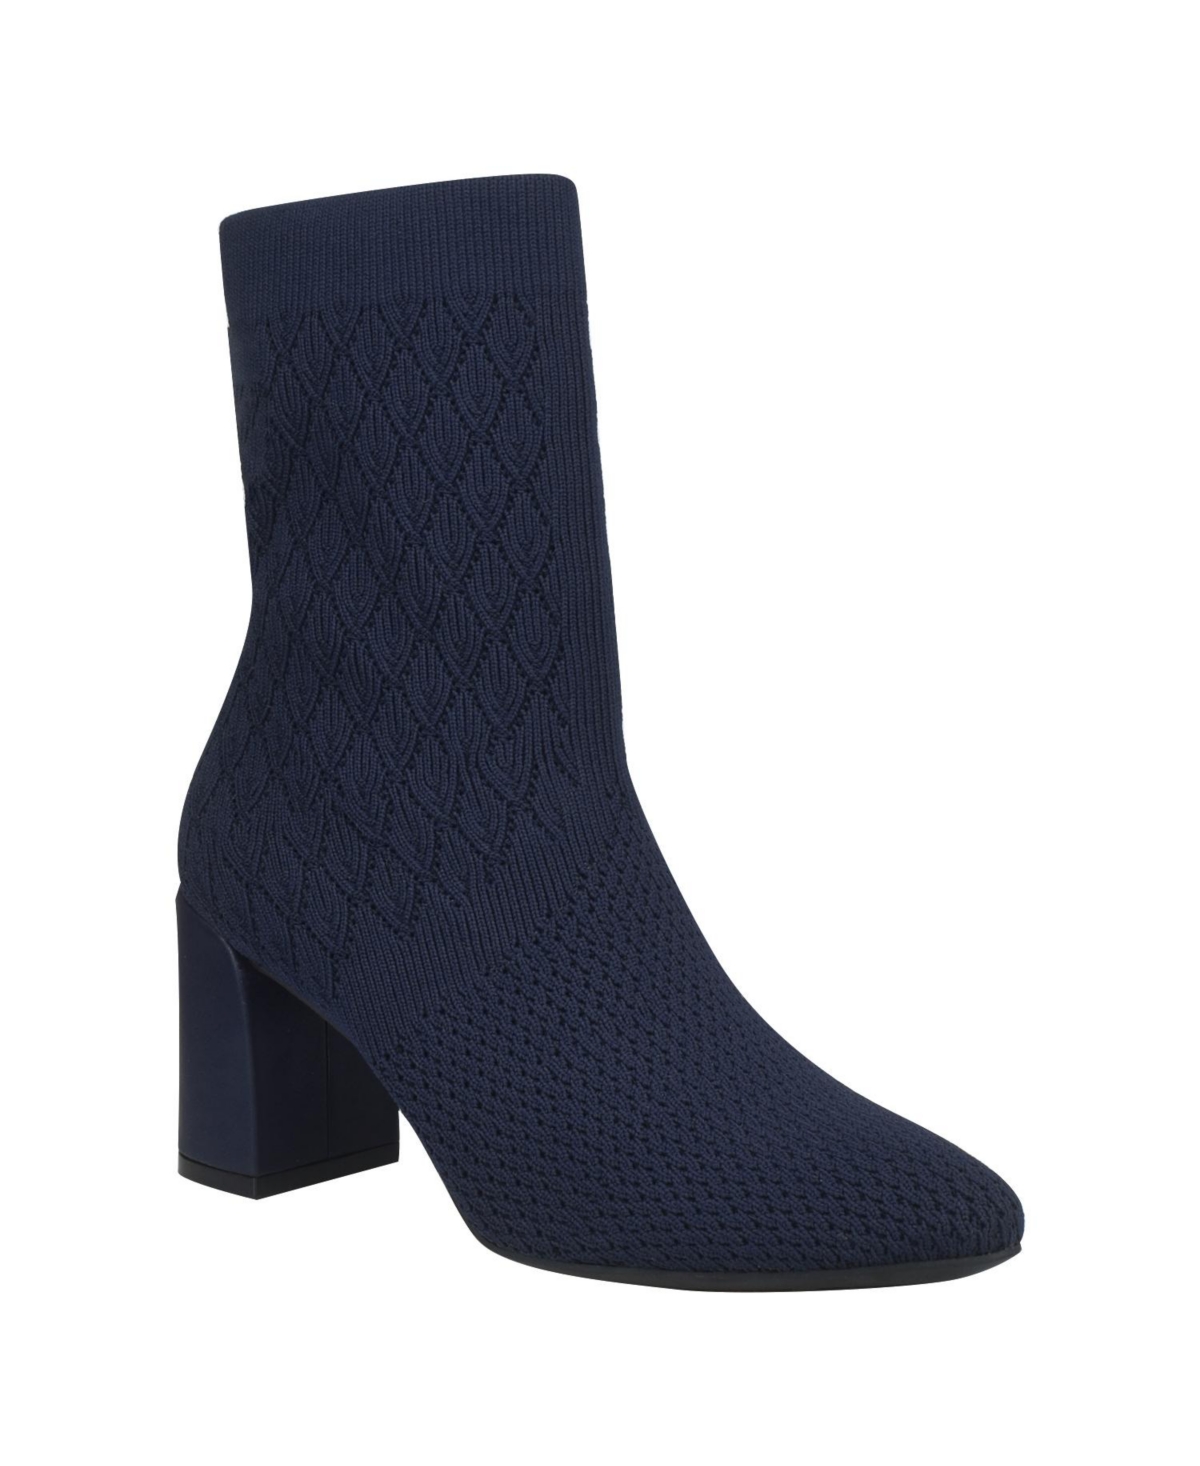 Women's Vyra Stretch Knit Booties with Memory Foam - Midnight Blue